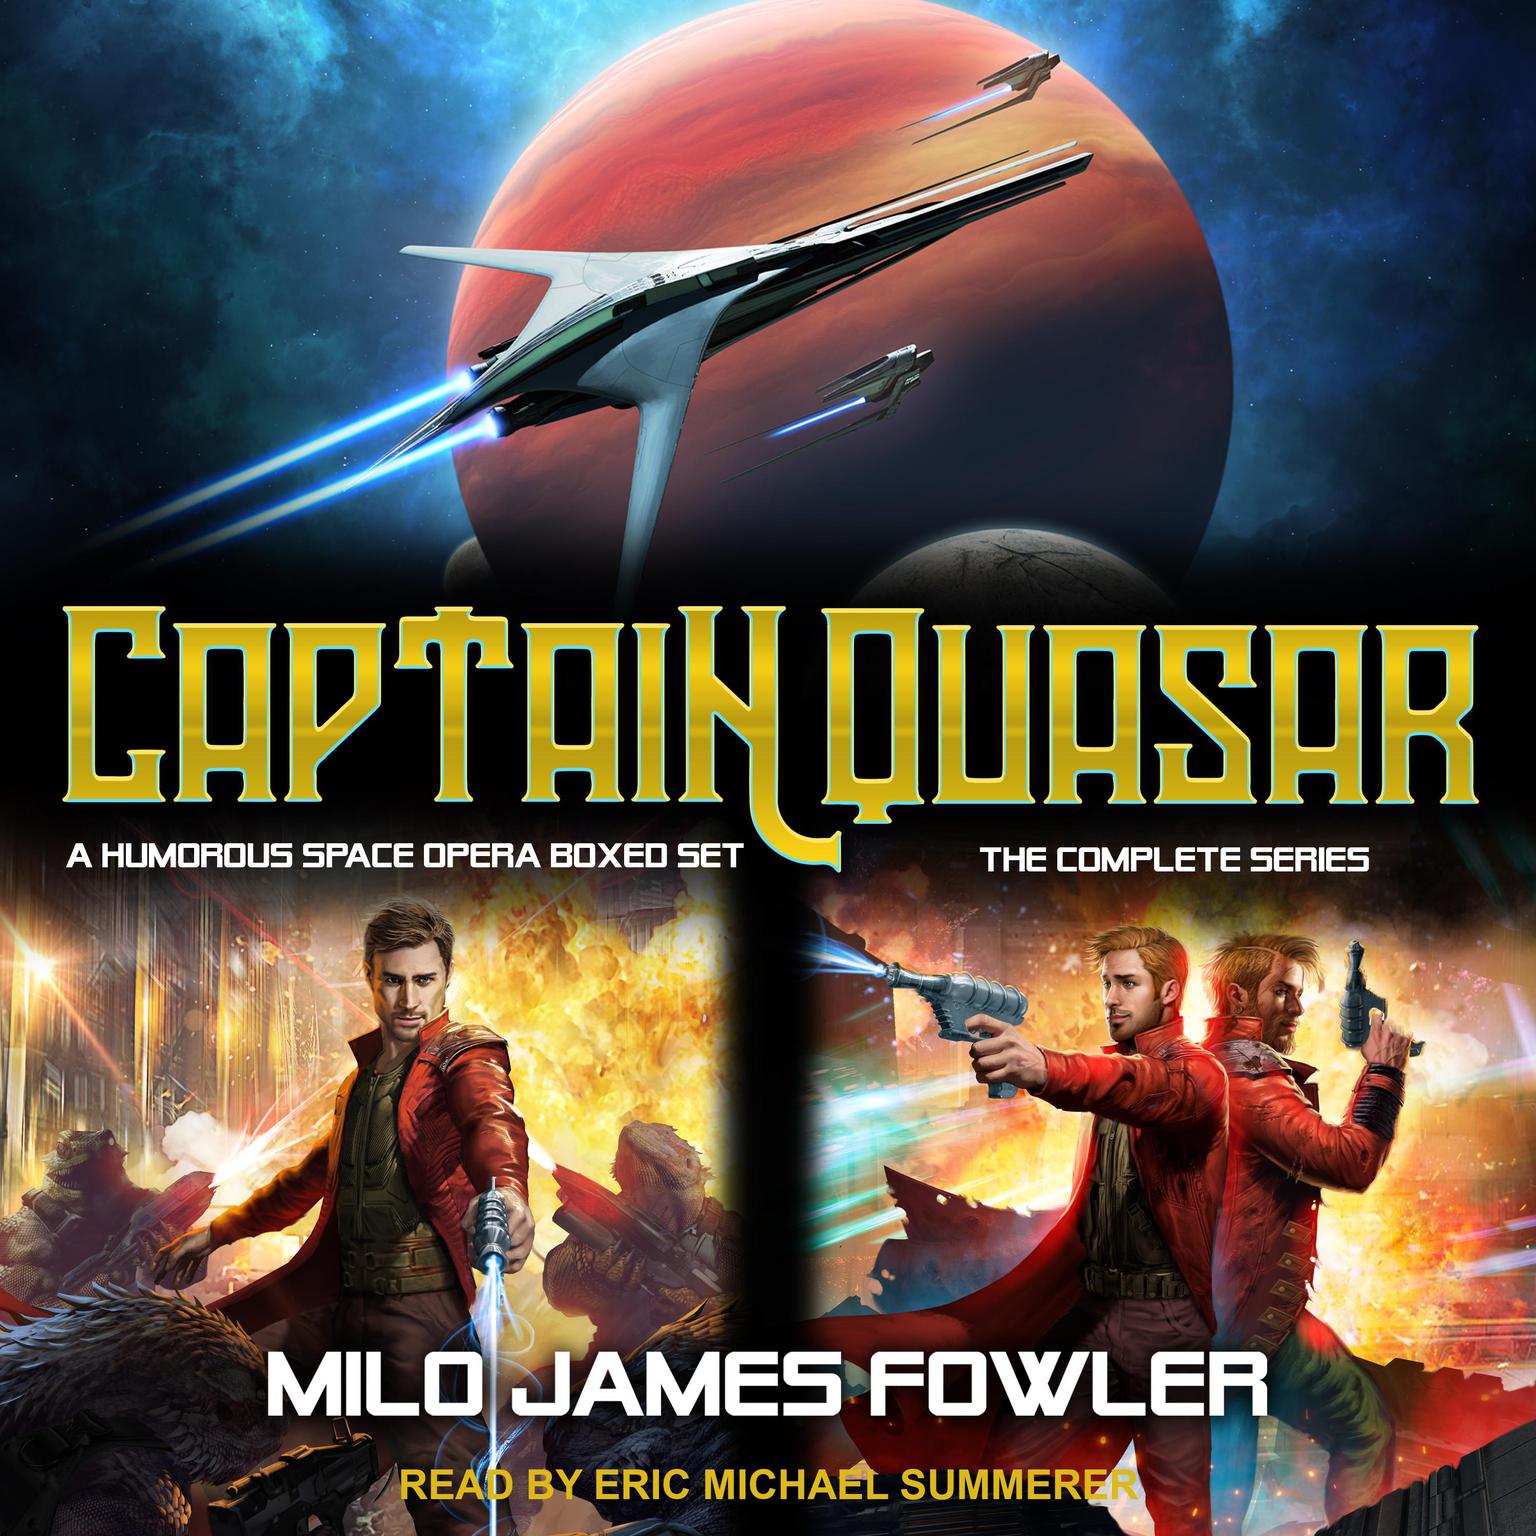 Captain Quasar: The Complete Series: A Humorous Space Opera Boxed Set Audiobook, by Milo James Fowler